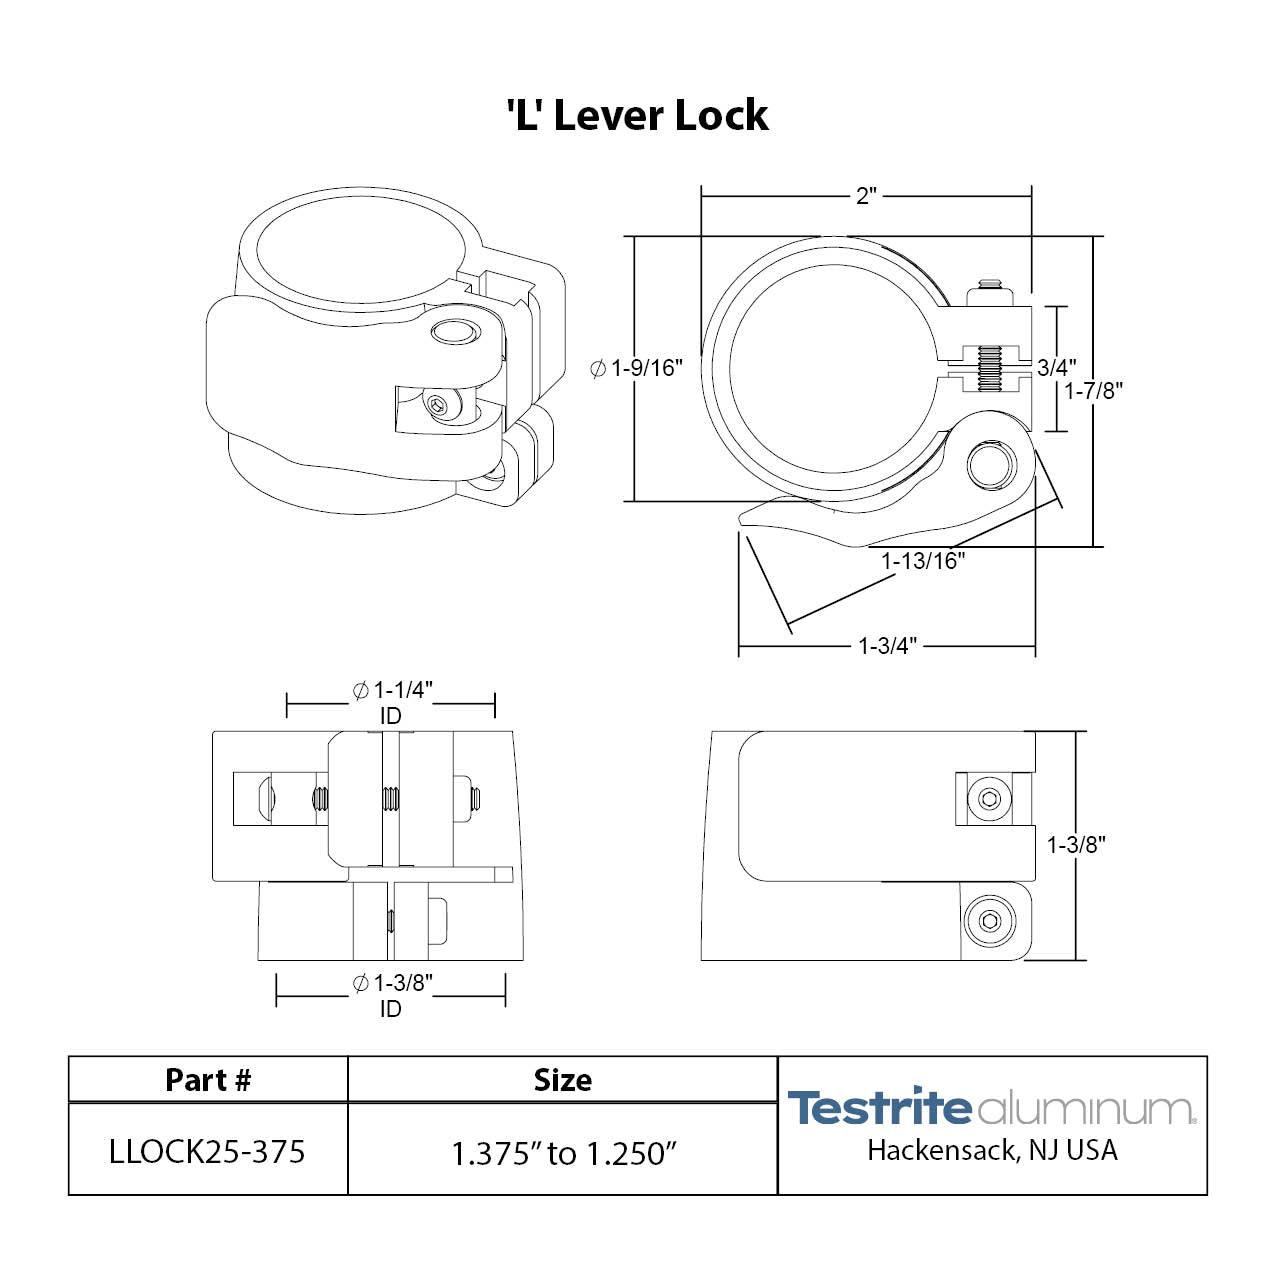 Specification sheet for LLOCK1250-1375, Telescopic Tubing Lock for 1-1/4" to 1-3/8"